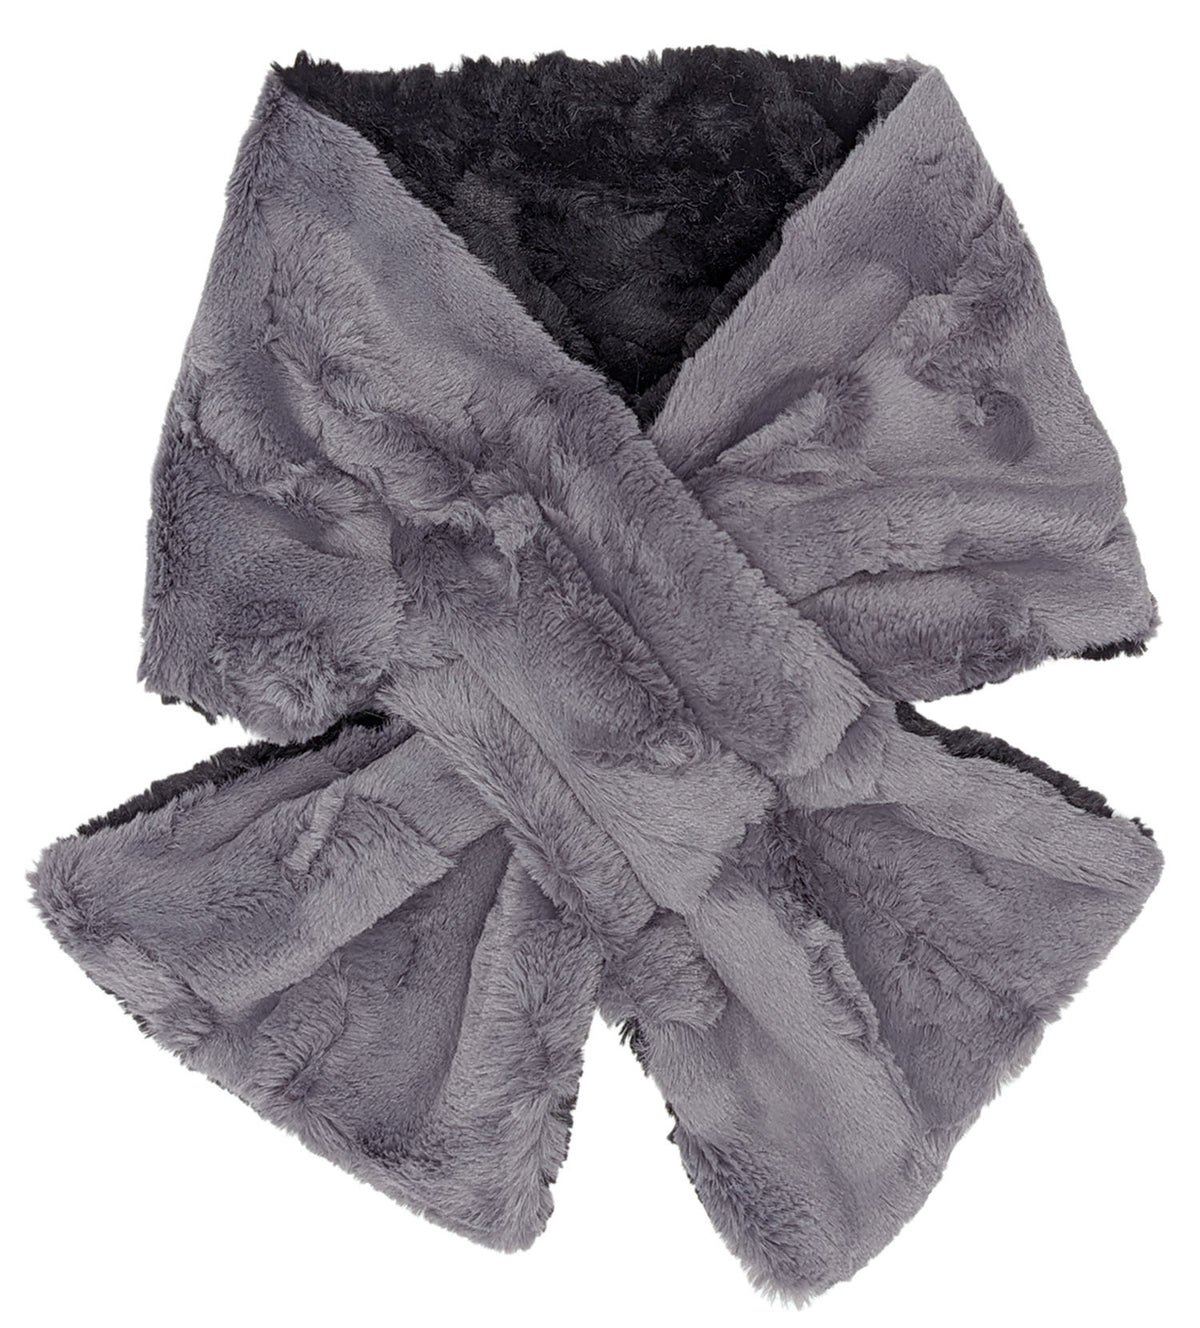 Pull Through Scarf Cuddly Faux Fur in Cool Gray with Cuddly Black handmade in Seattle WA USA by Pandemonium Millinery